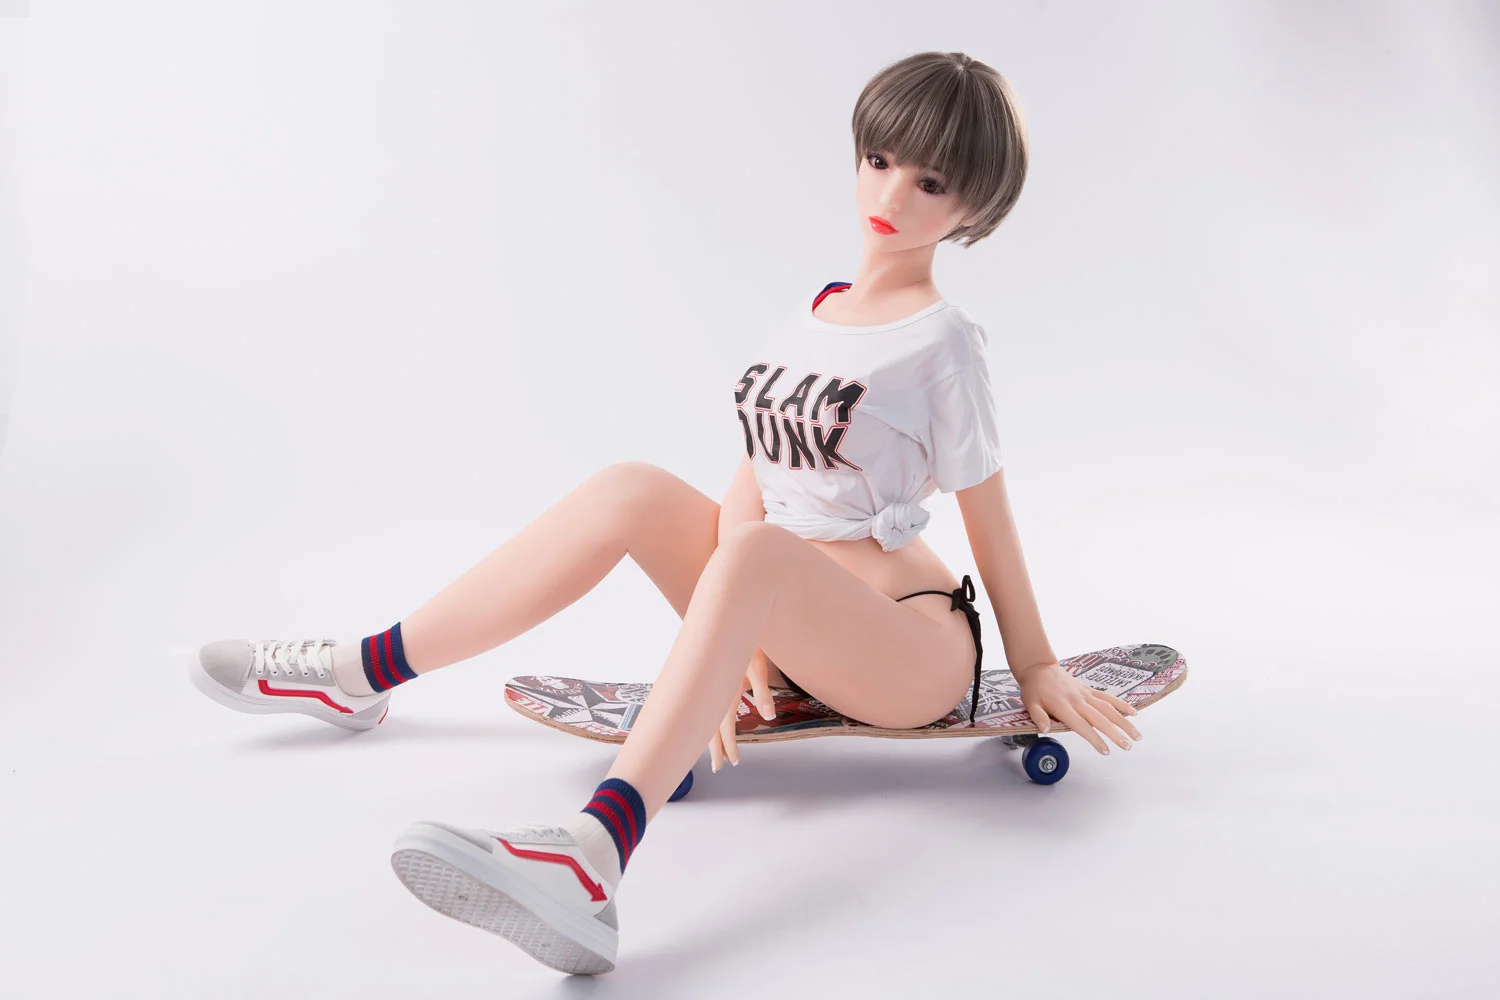 Mini sex doll with hands on skateboard